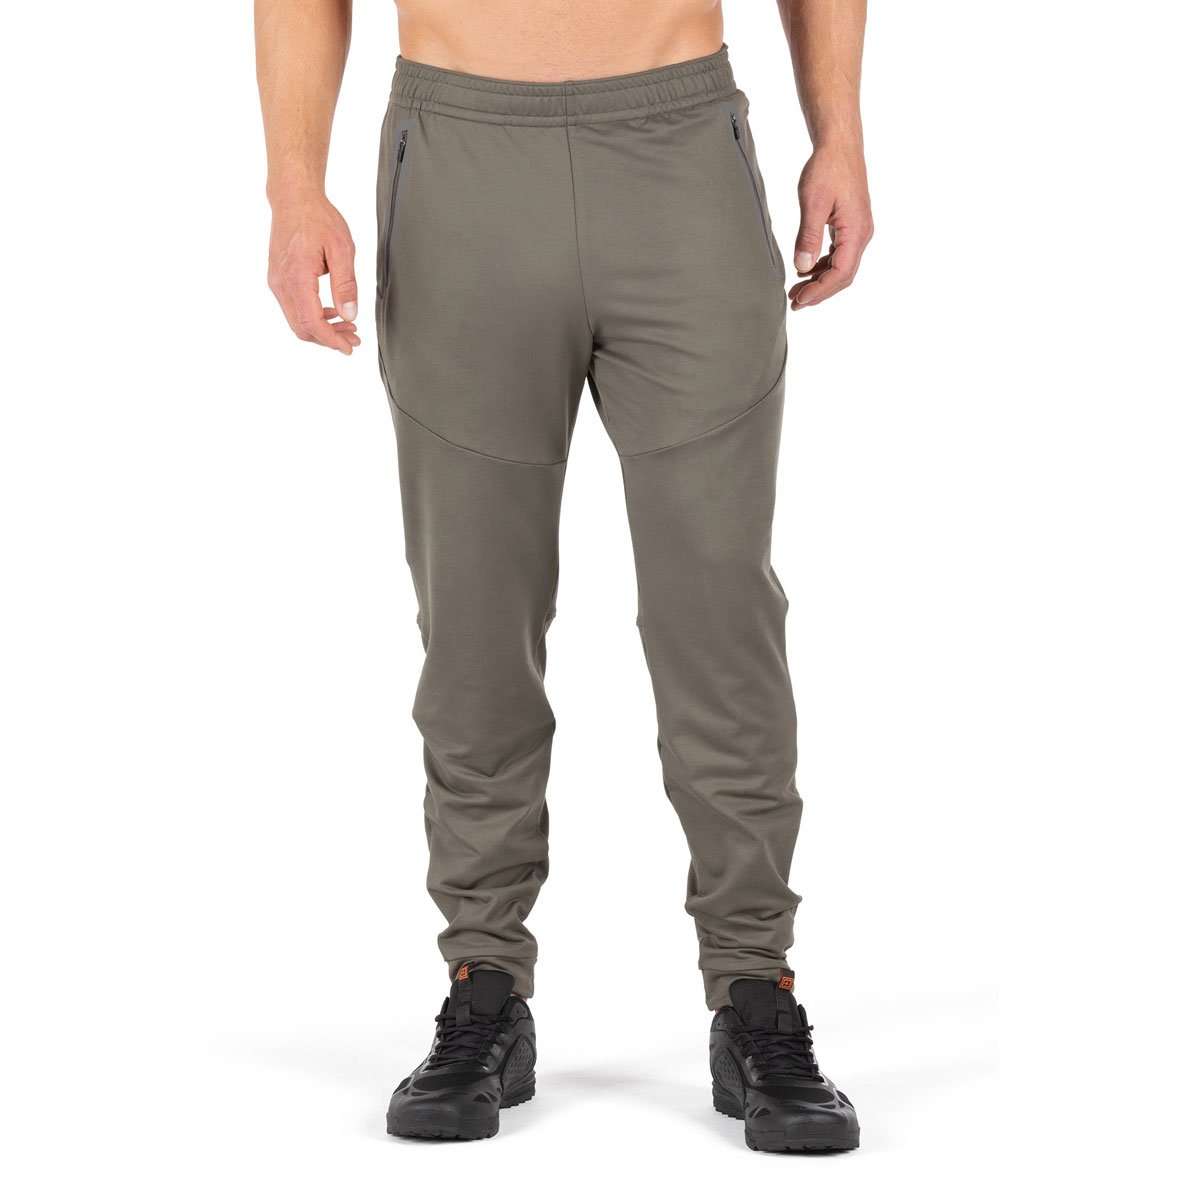 5.11 Recon Power Track Pant